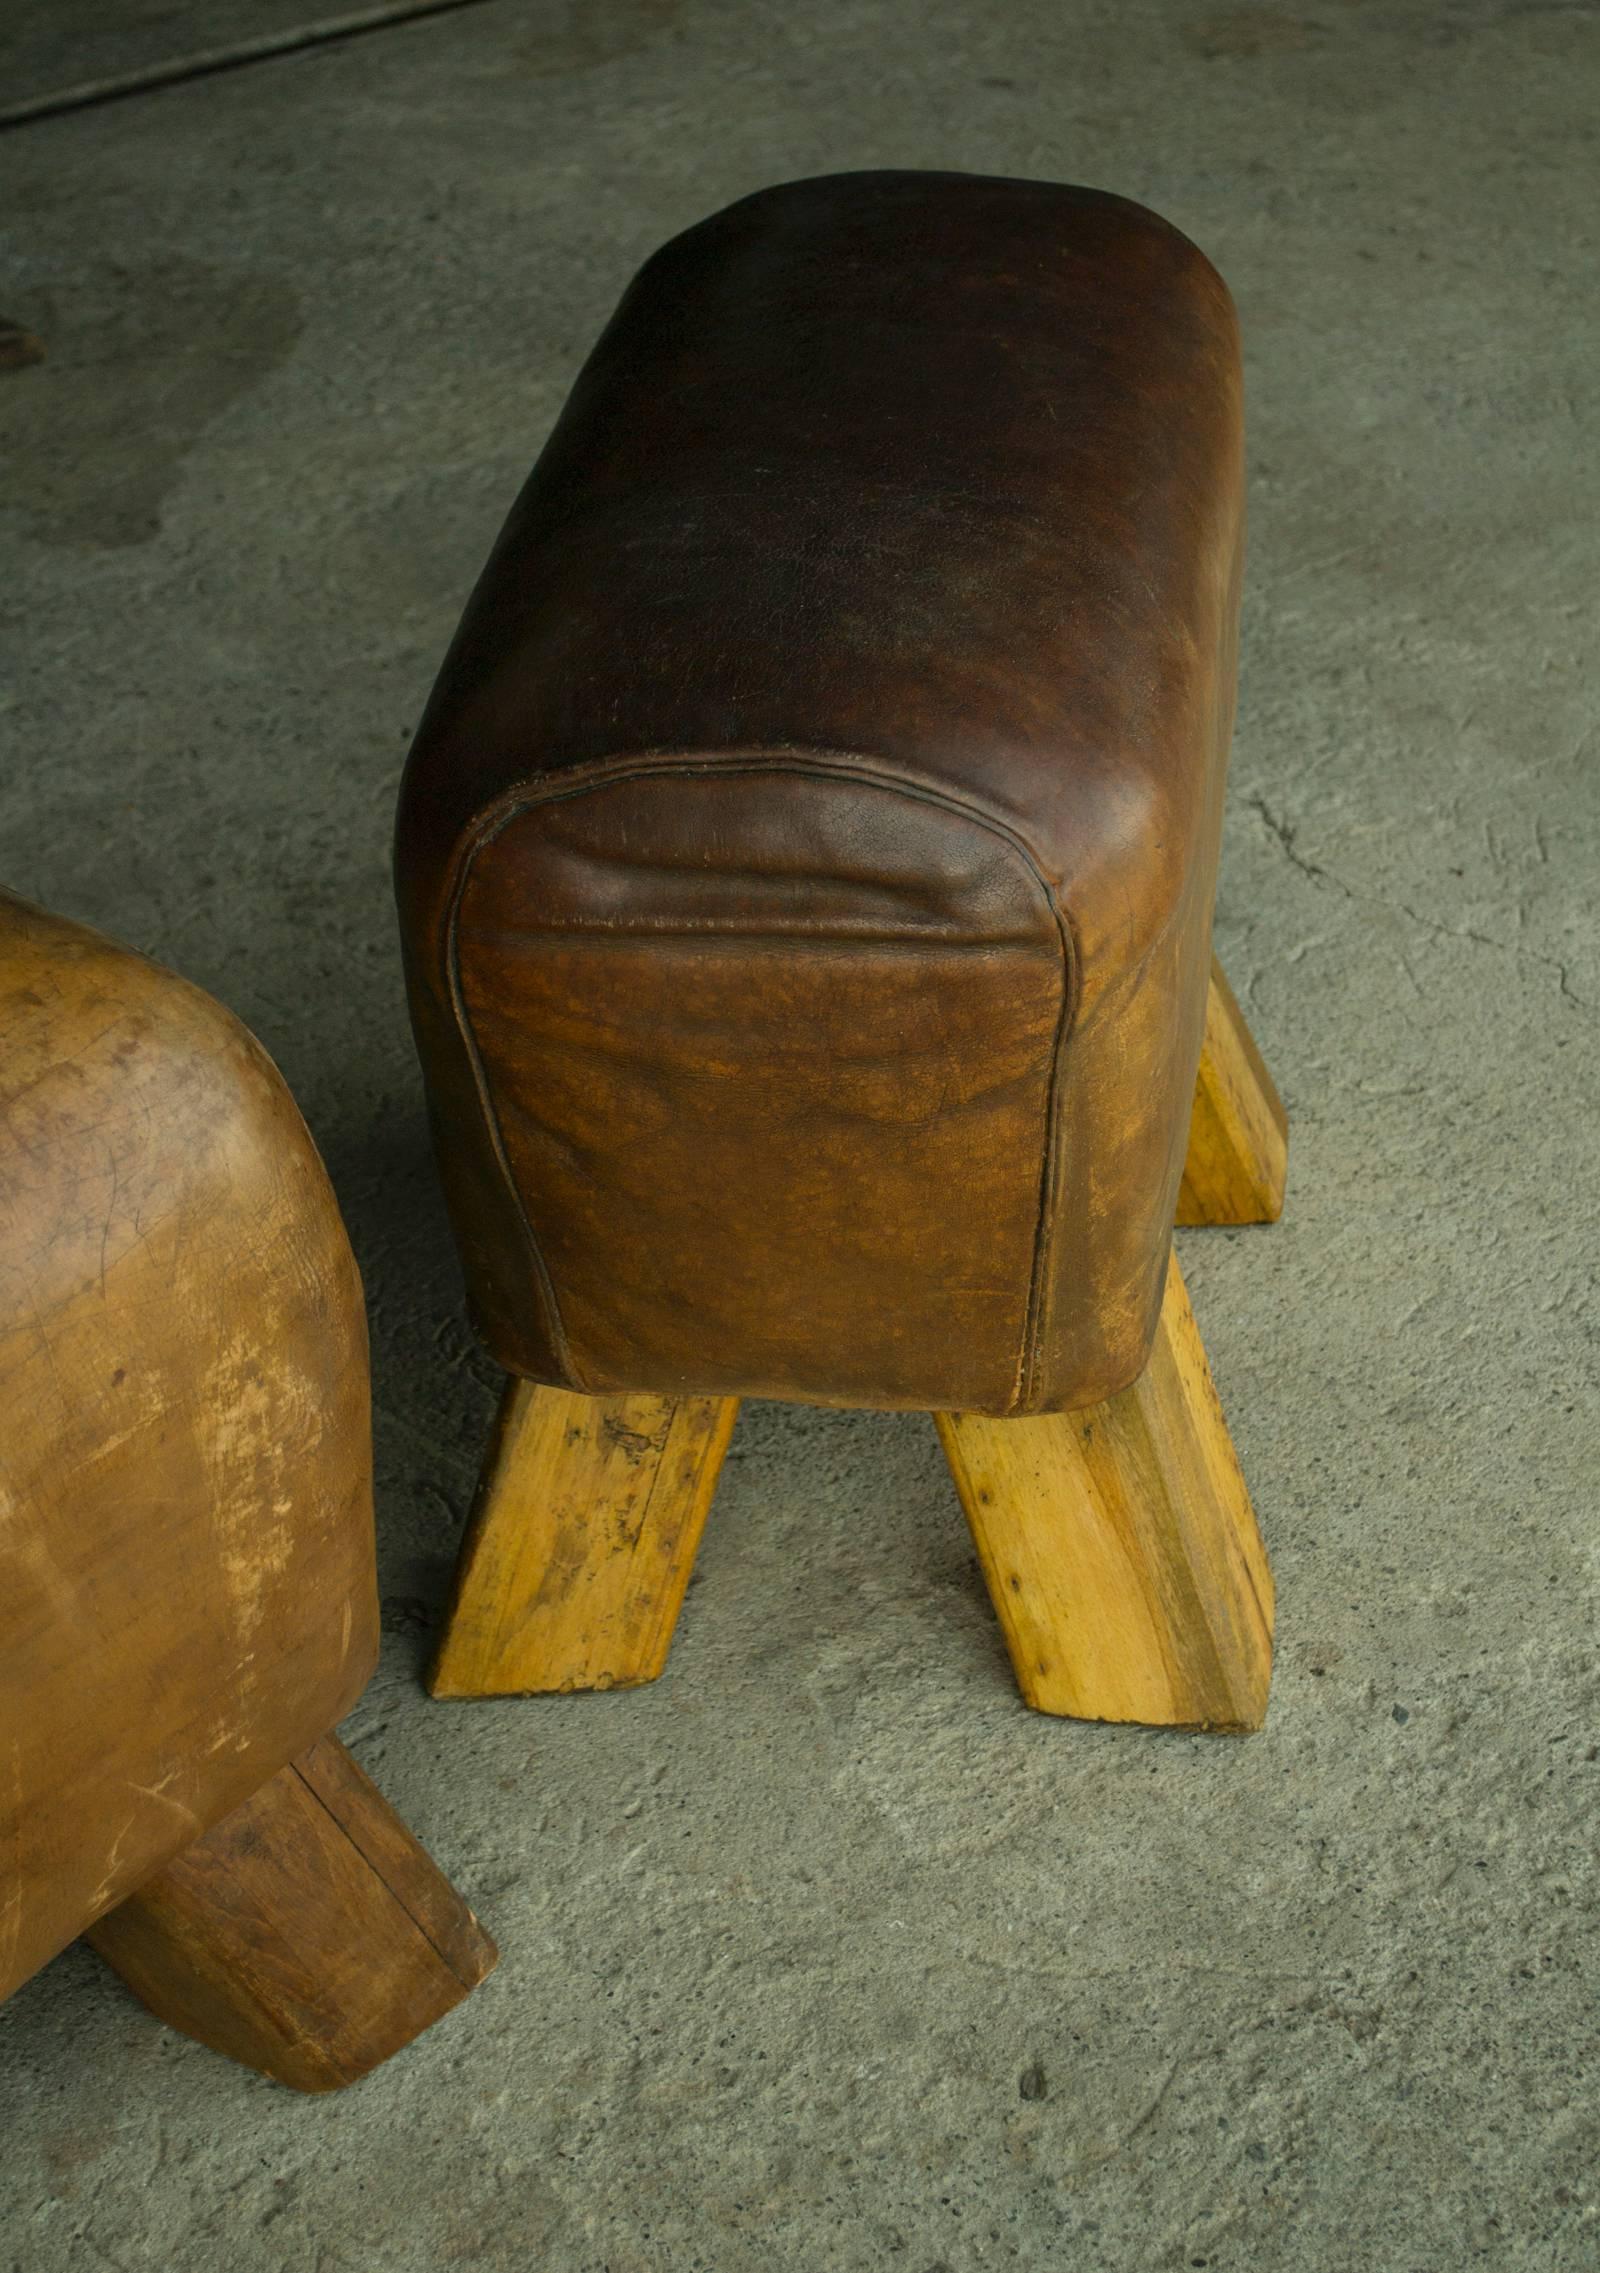 Piggy on the Left with darker legs is Available.*

Leather gym bench piggies with wooden legs.

Priced individually; each bench unique, please inquire for specific dimensions.